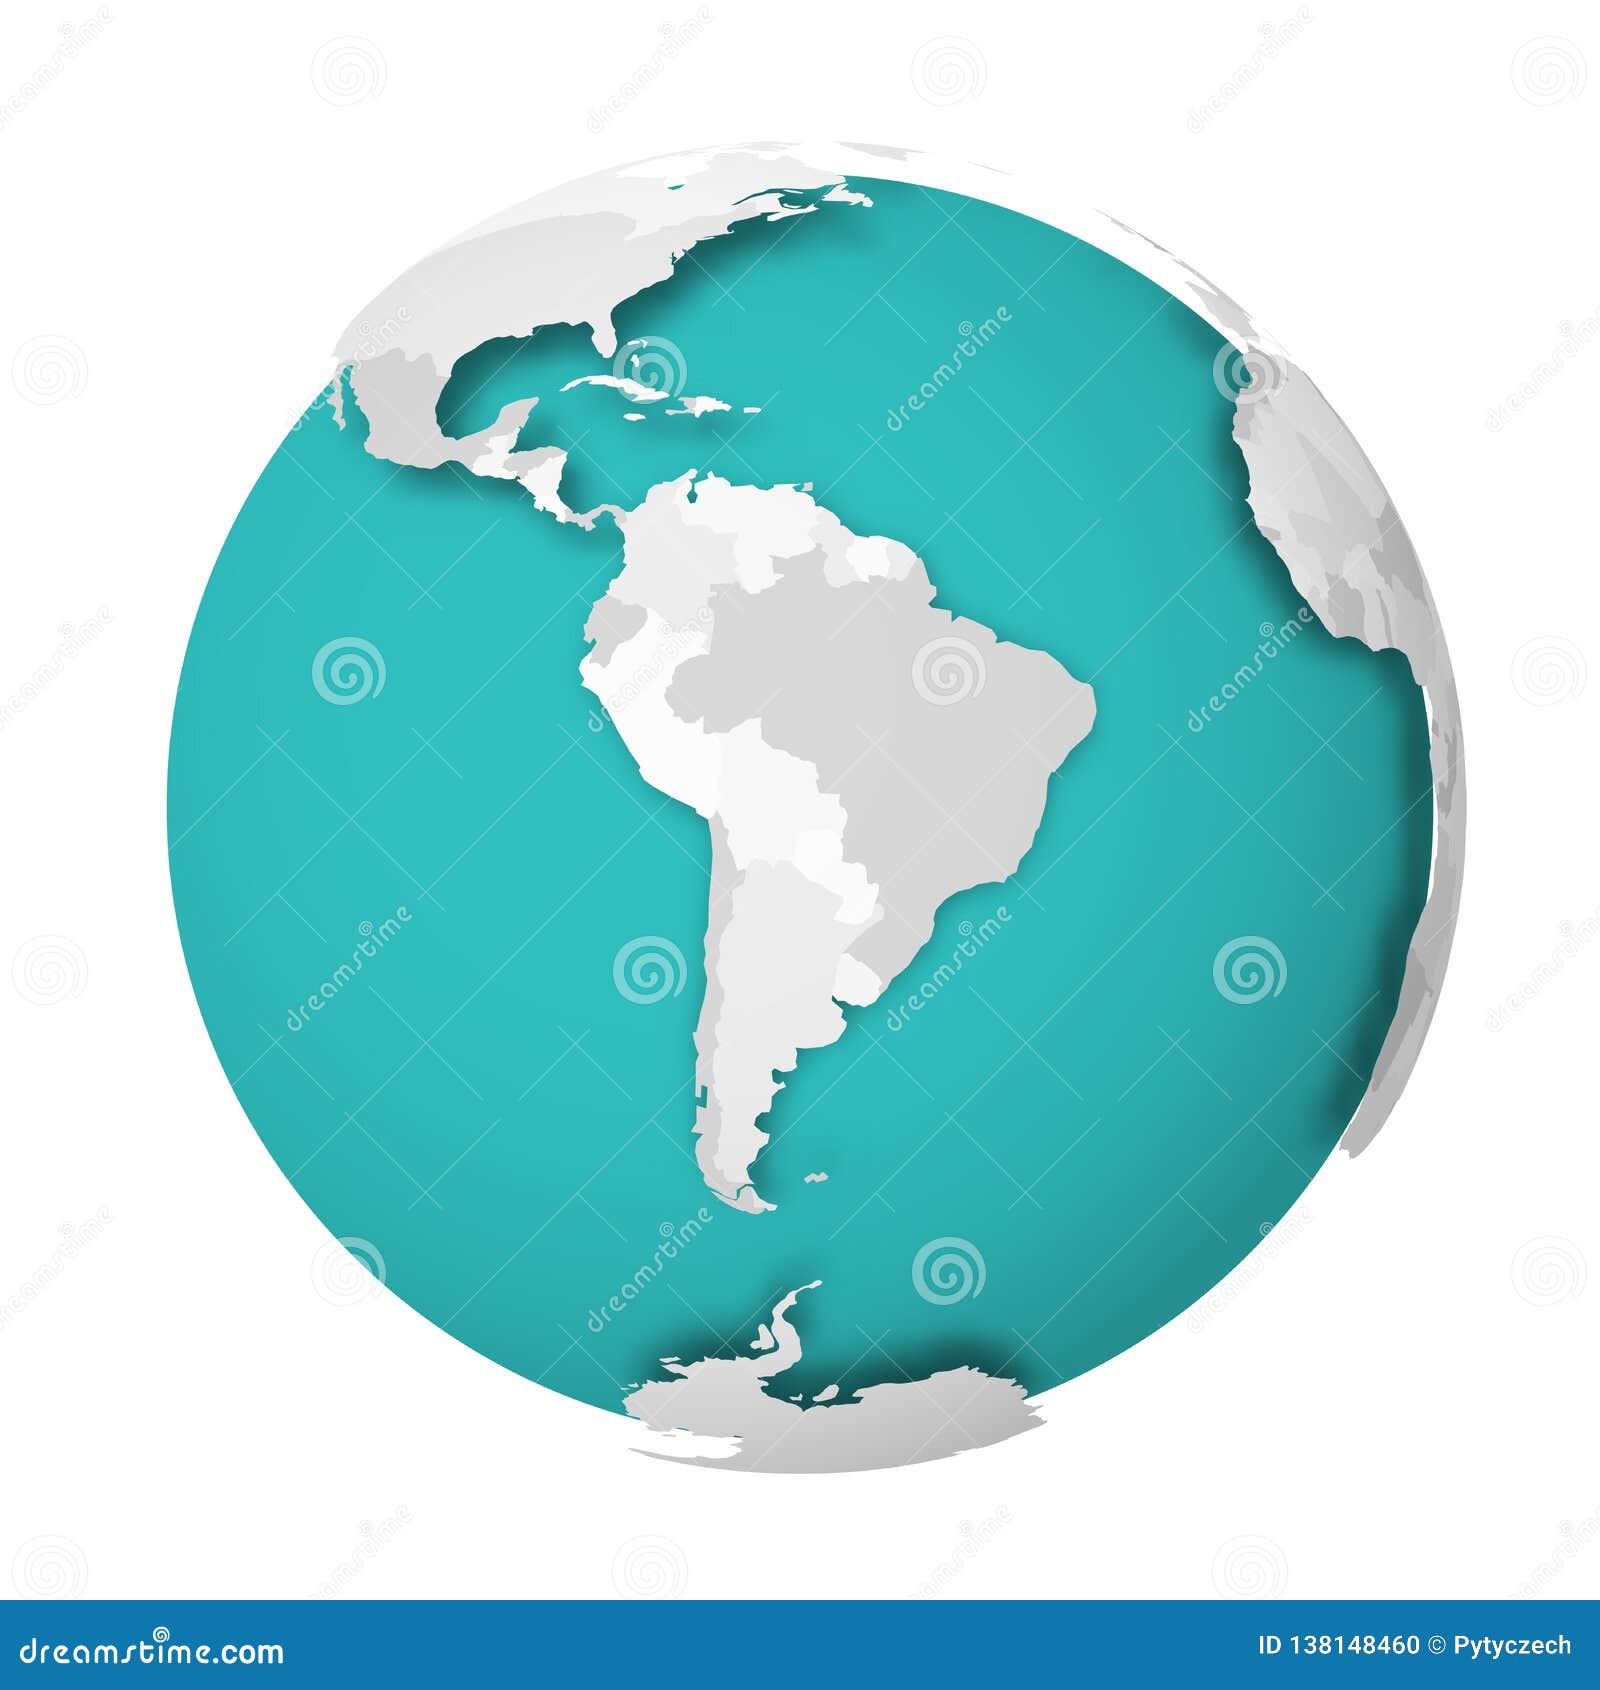 3d Earth Globe With Blank Political Map Dropping Shadow On Blue Green